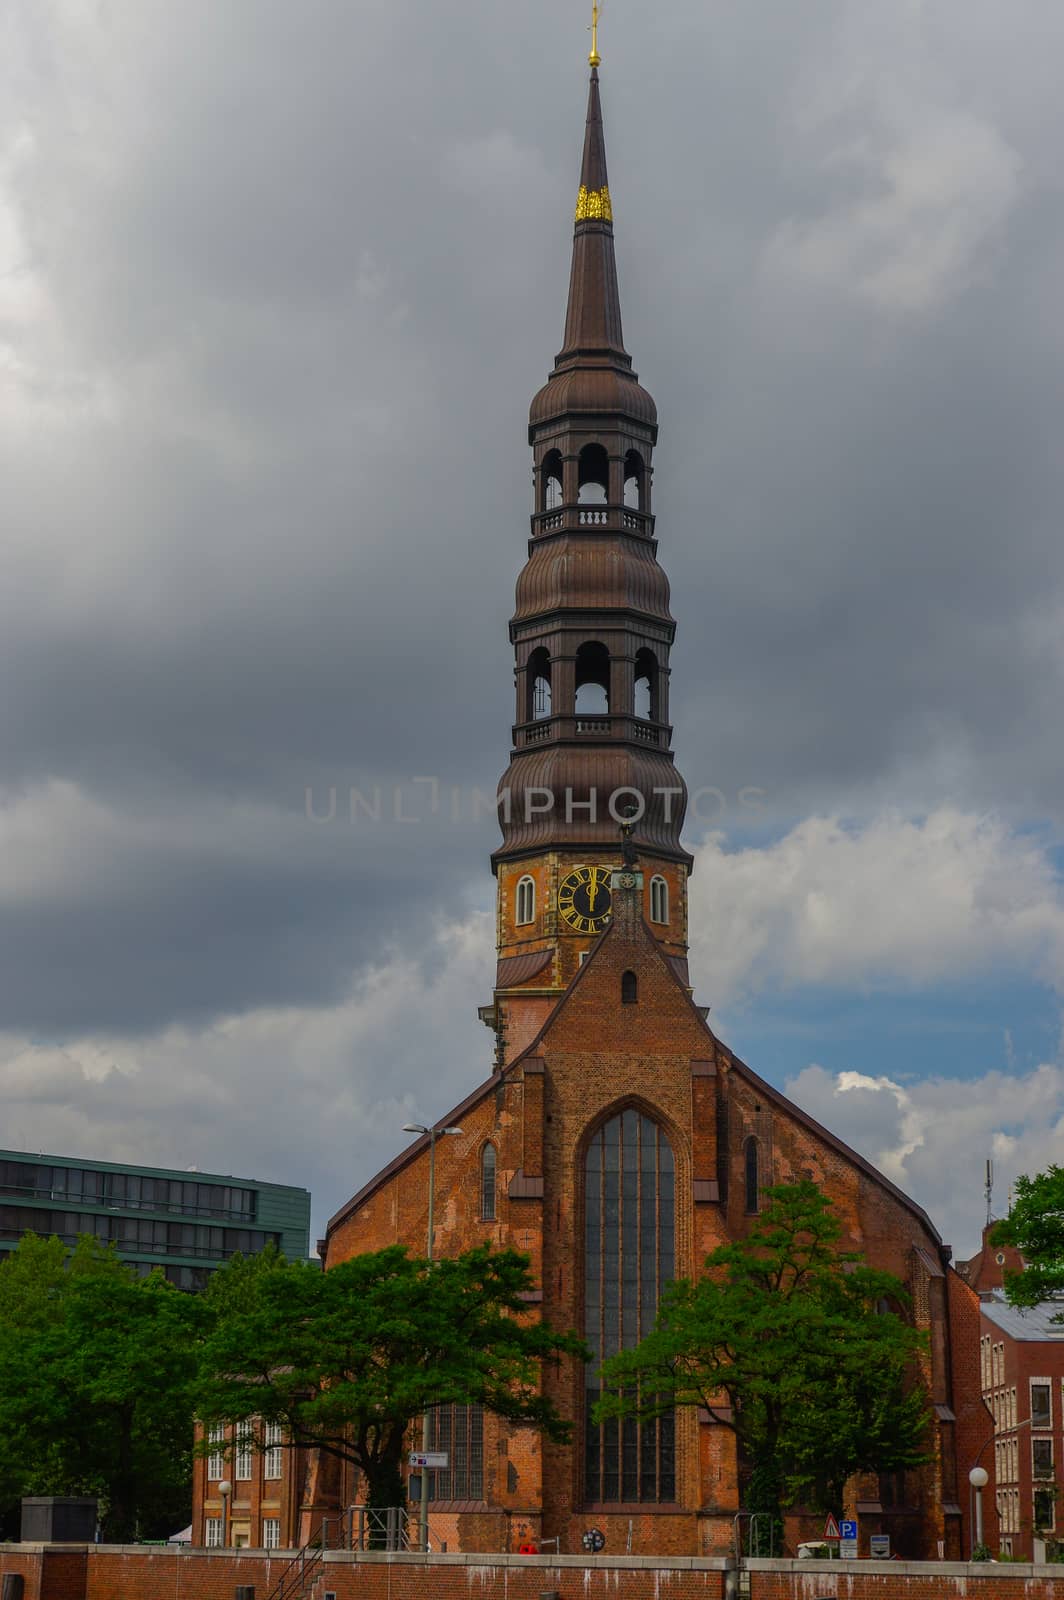 Hamburg, Germany - July 18, 2016: Warehouse District could Speicherstadt, with old Church on the elb river at cloudy day. by evolutionnow